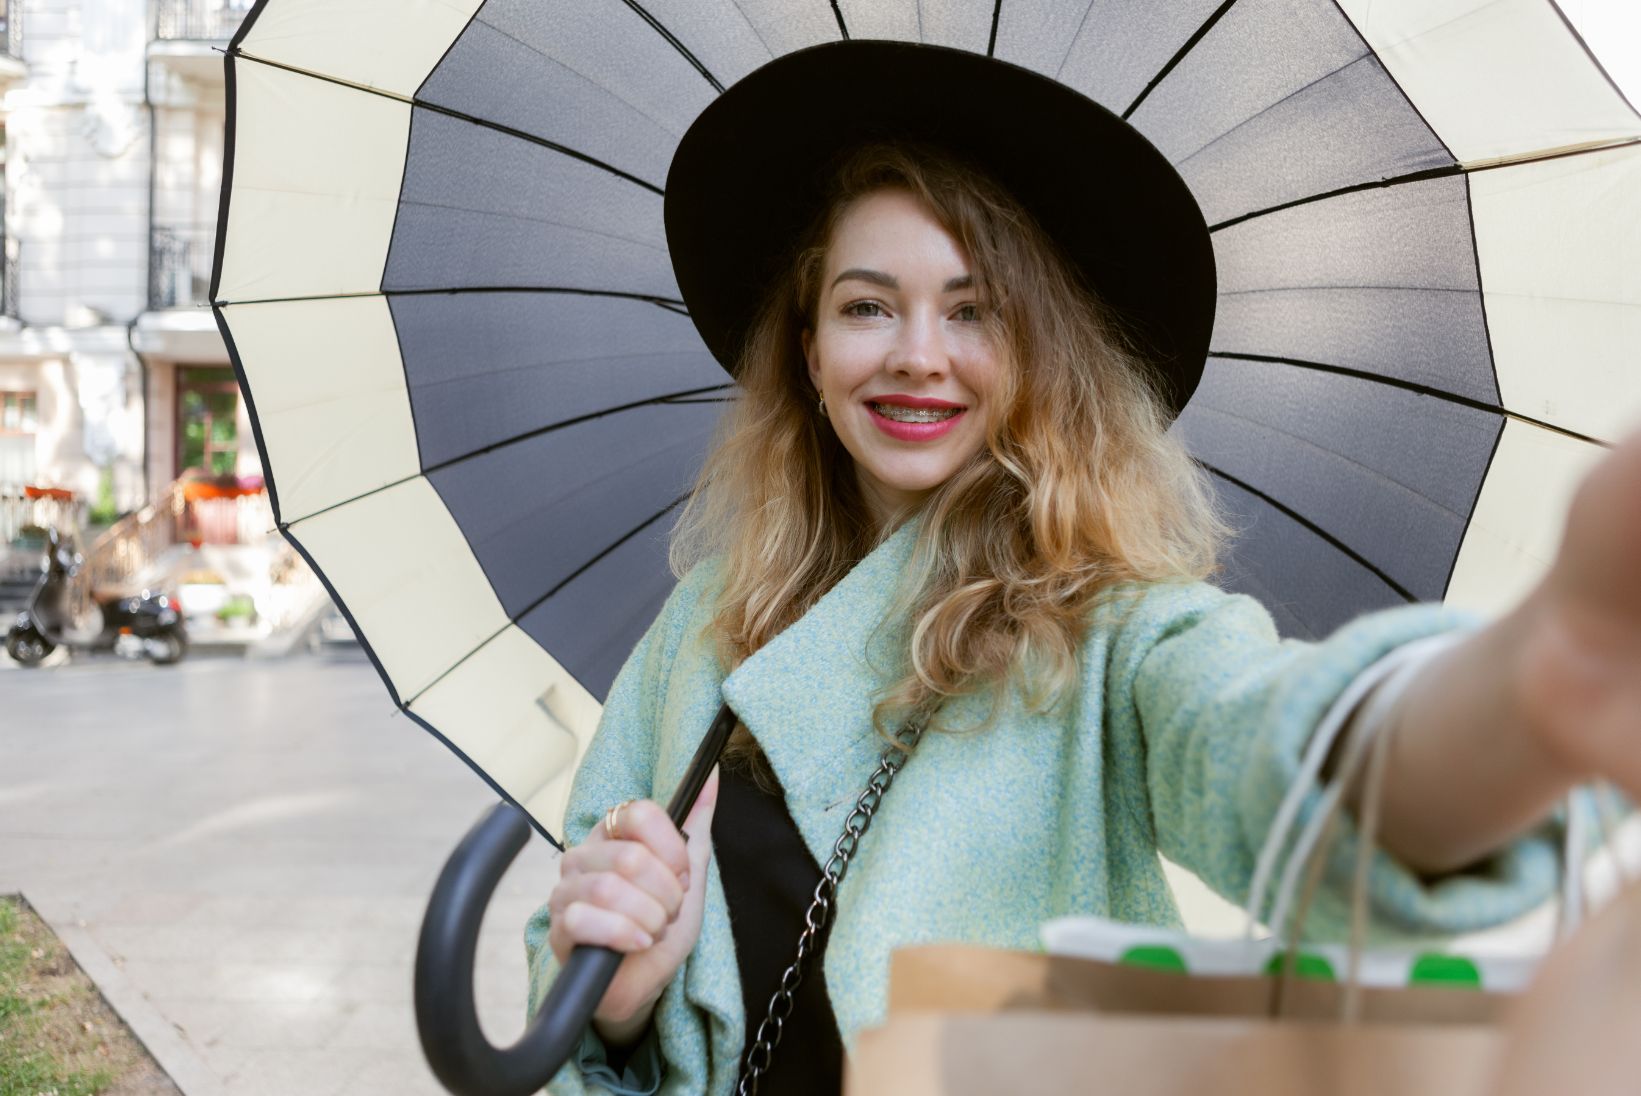 selfie-portrait-attractive-woman-autumn-clothes-with-shopping-bags-umbrella-city